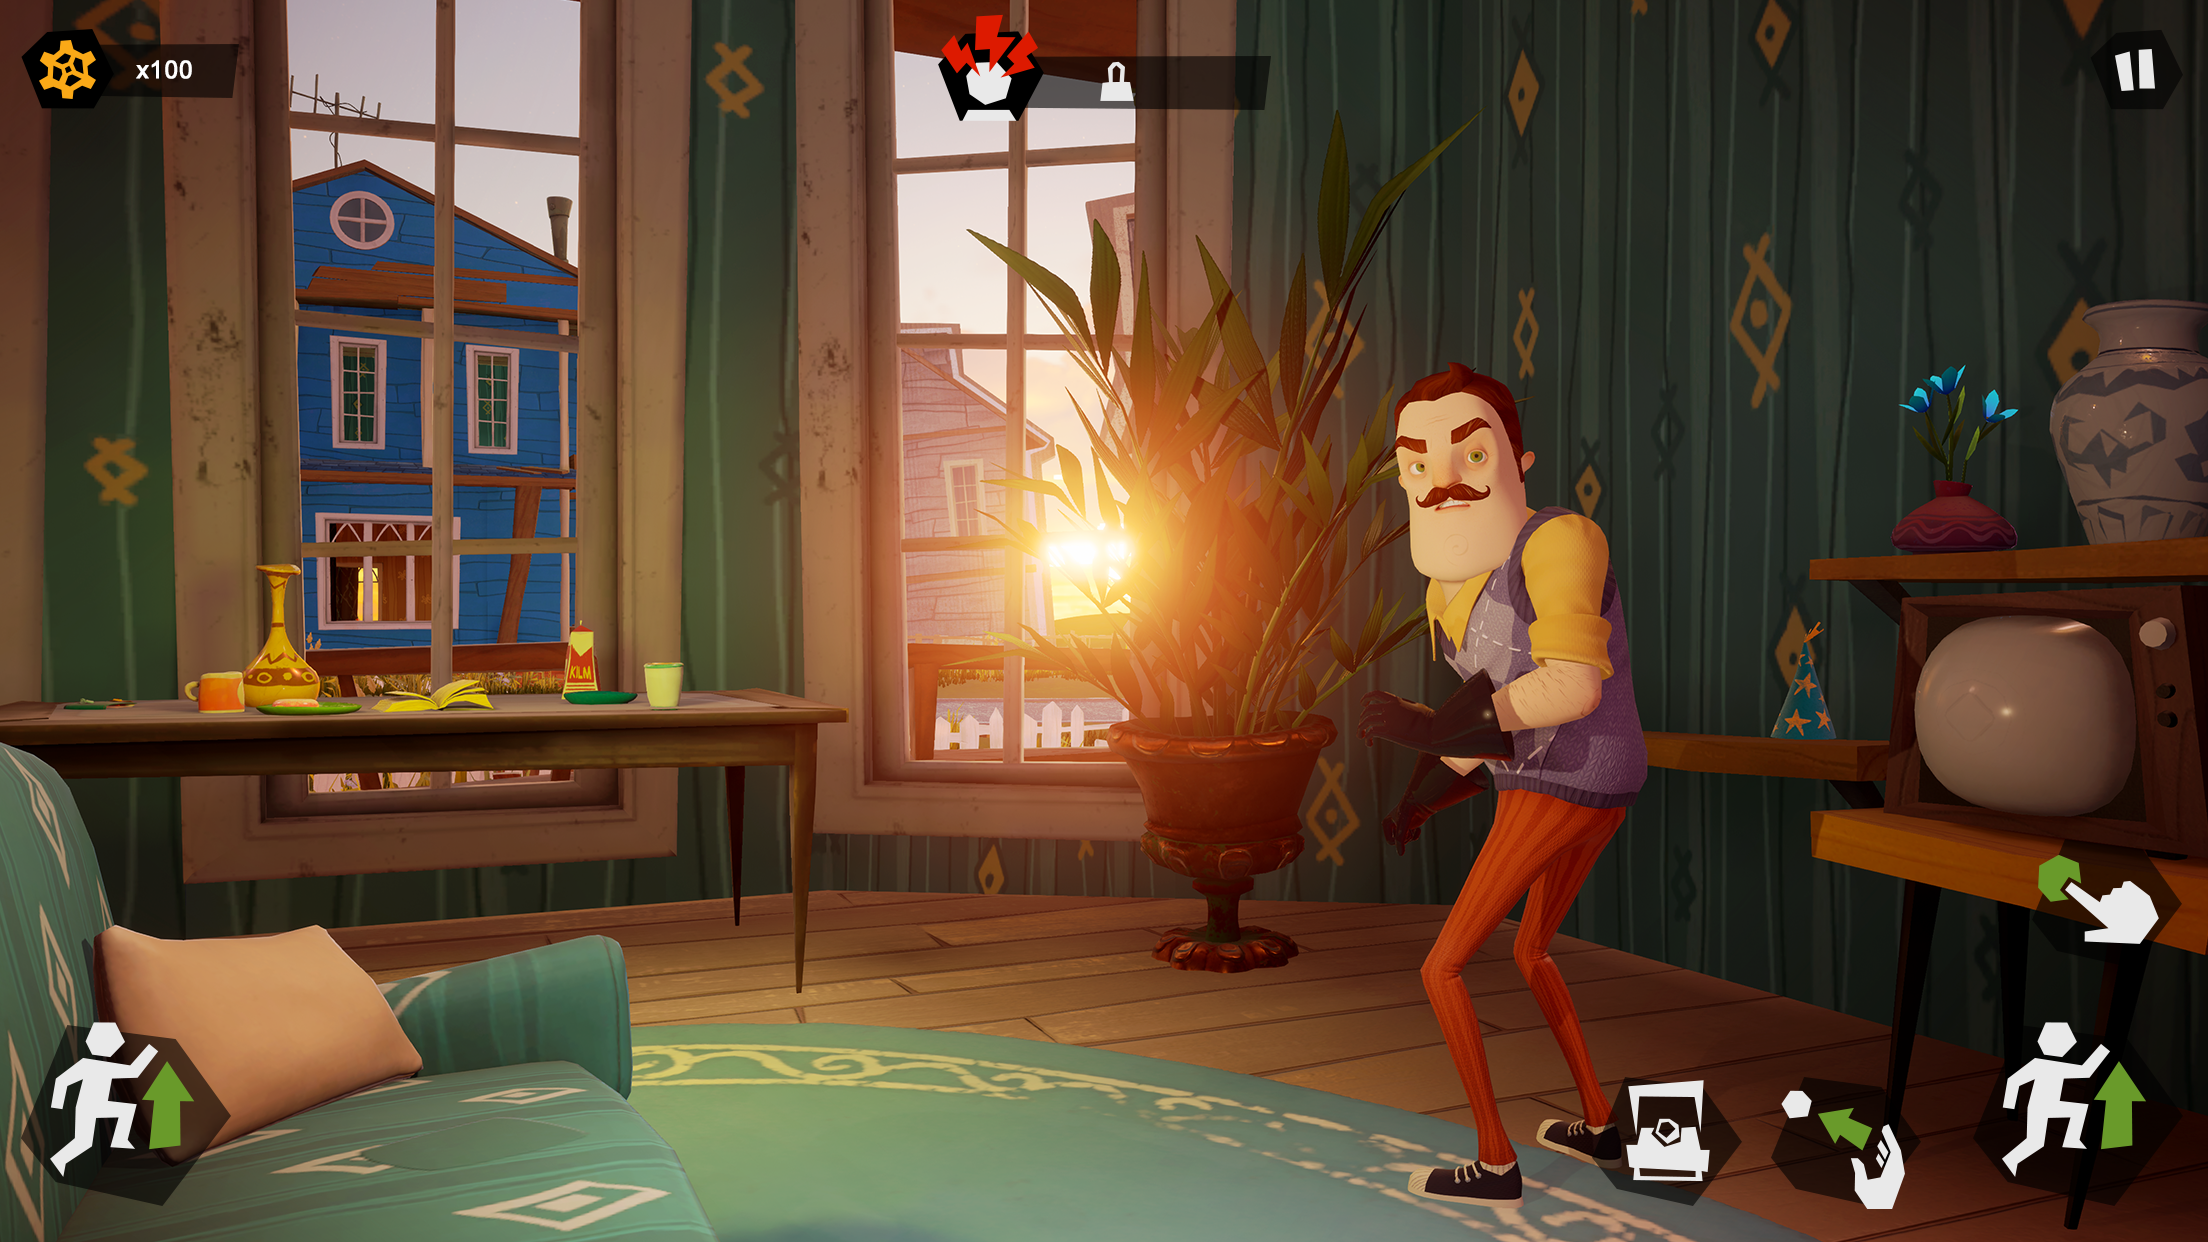 Hello Secret Neighbor APK for Android Download